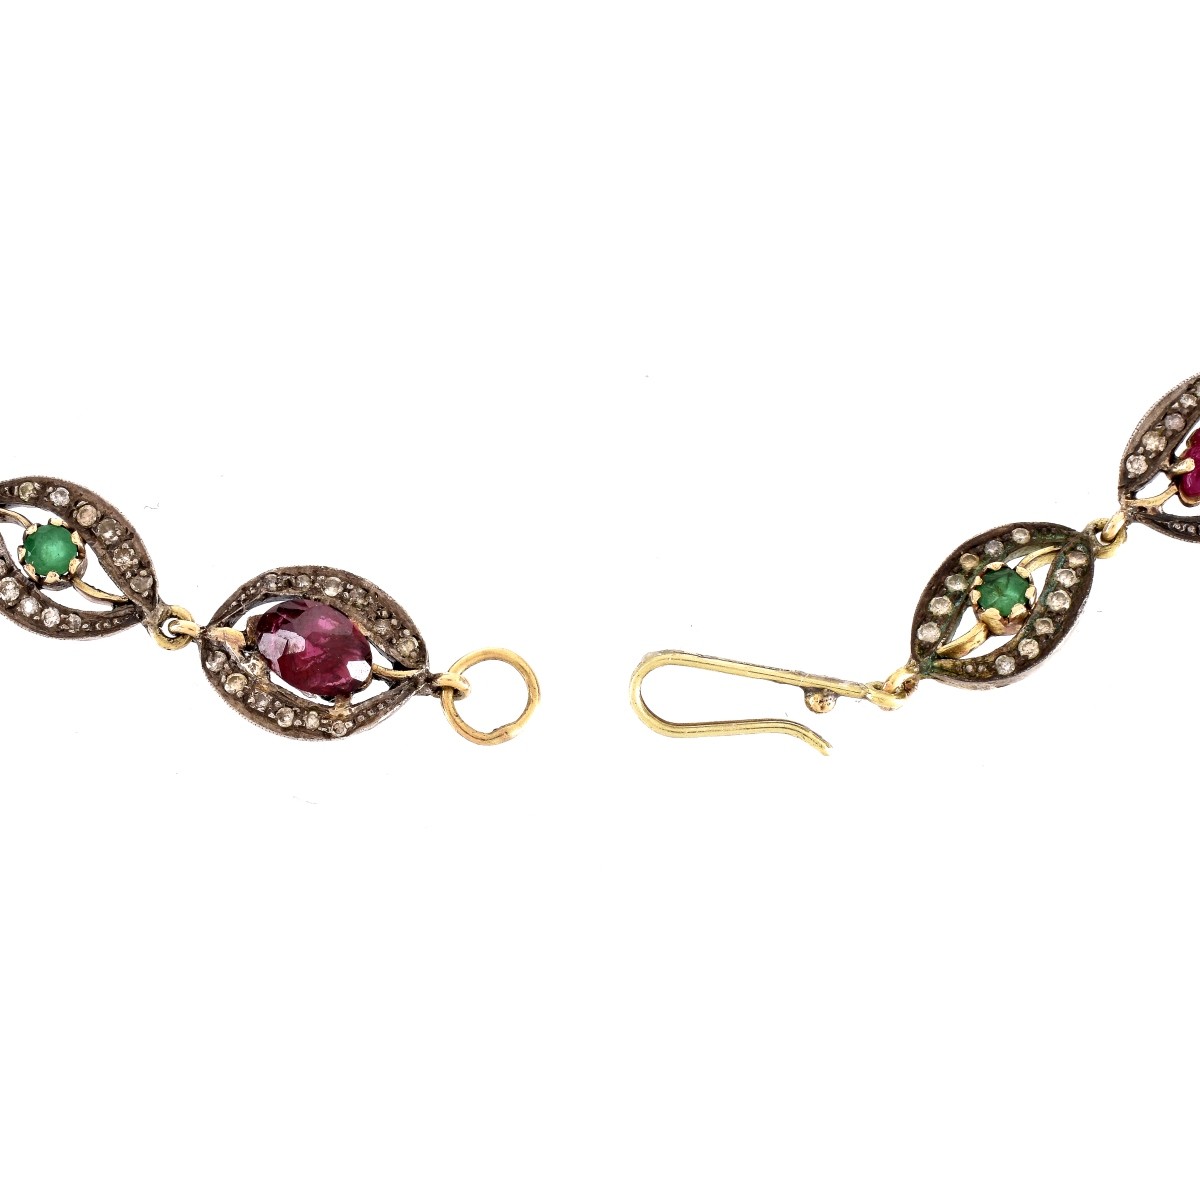 Mughal style Diamond, Emerald and Ruby Necklace